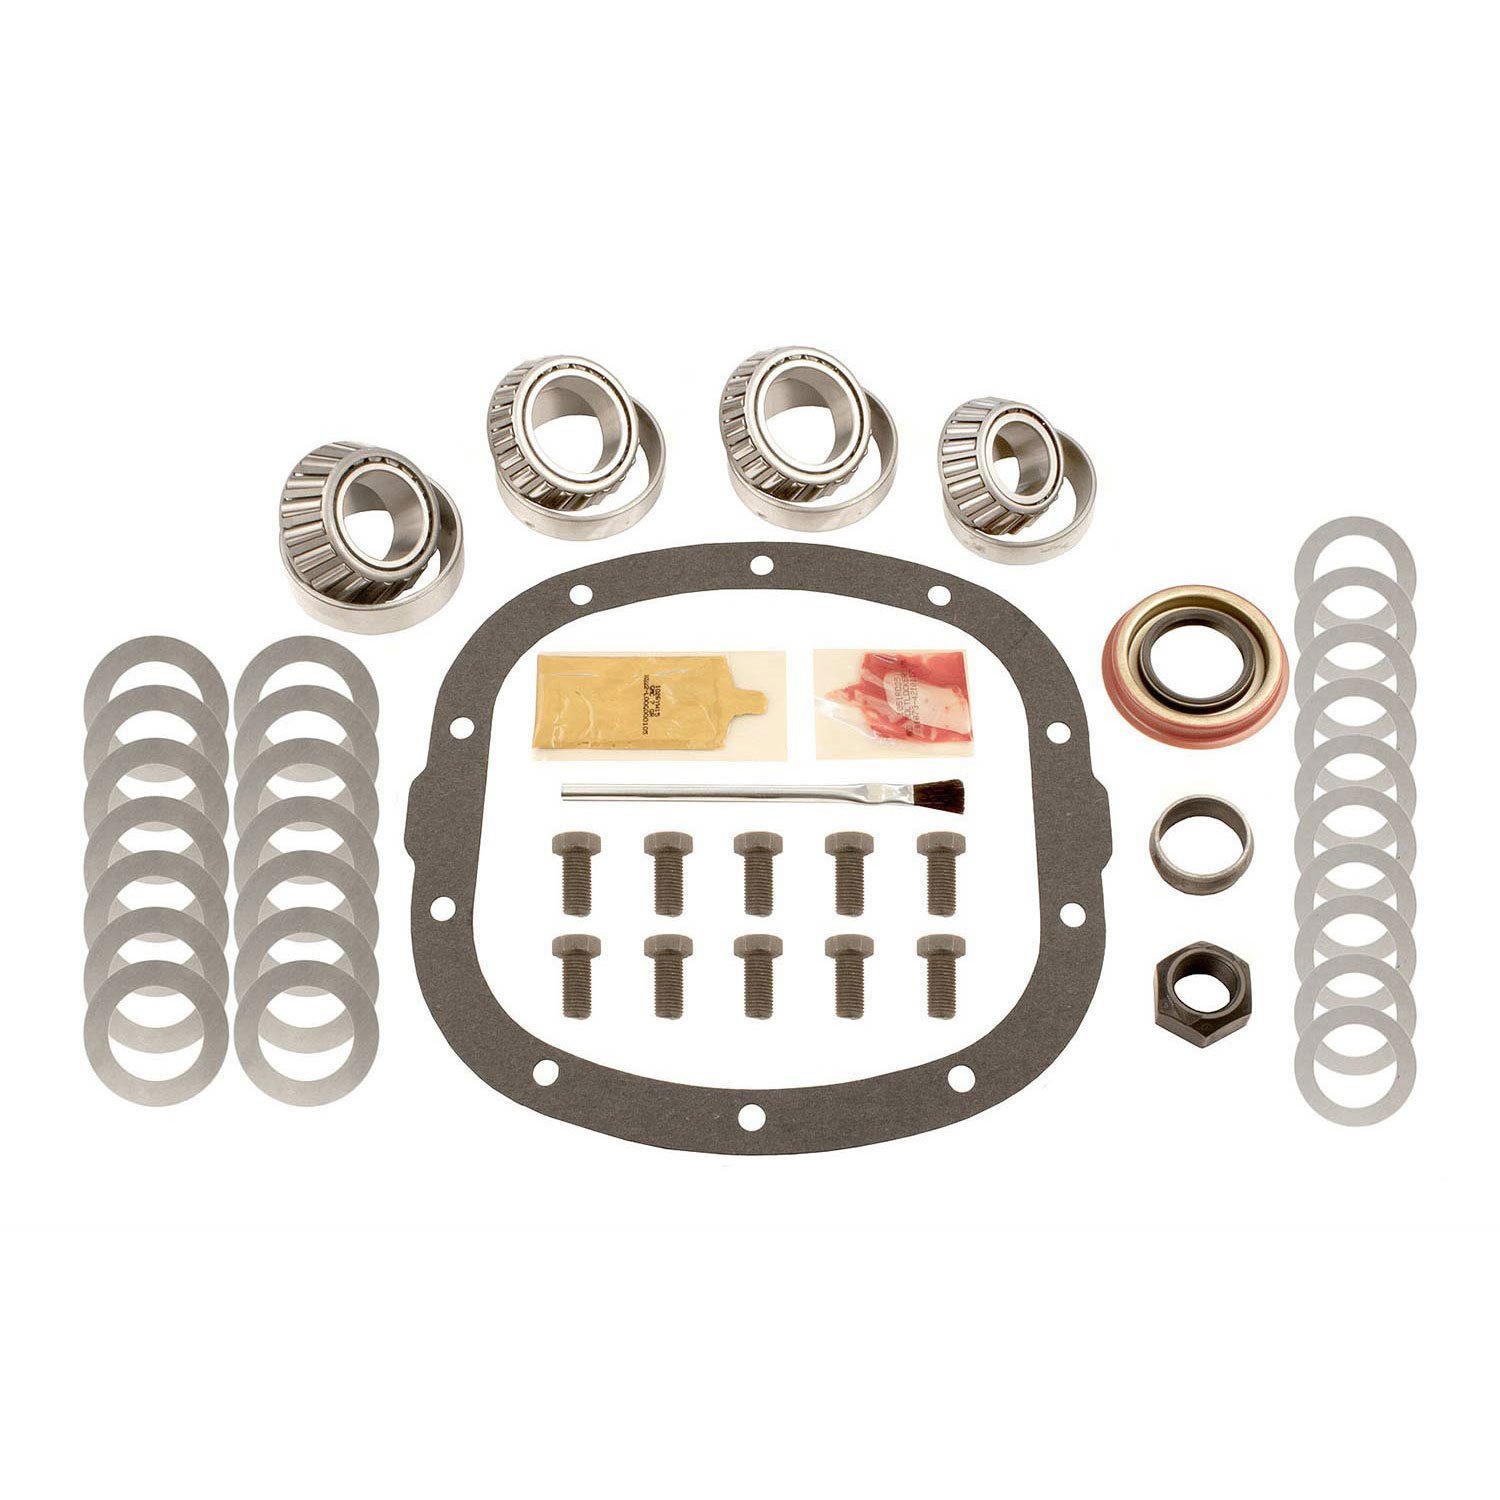 Differential Complete Kit GM 7.5" 10 Bolt